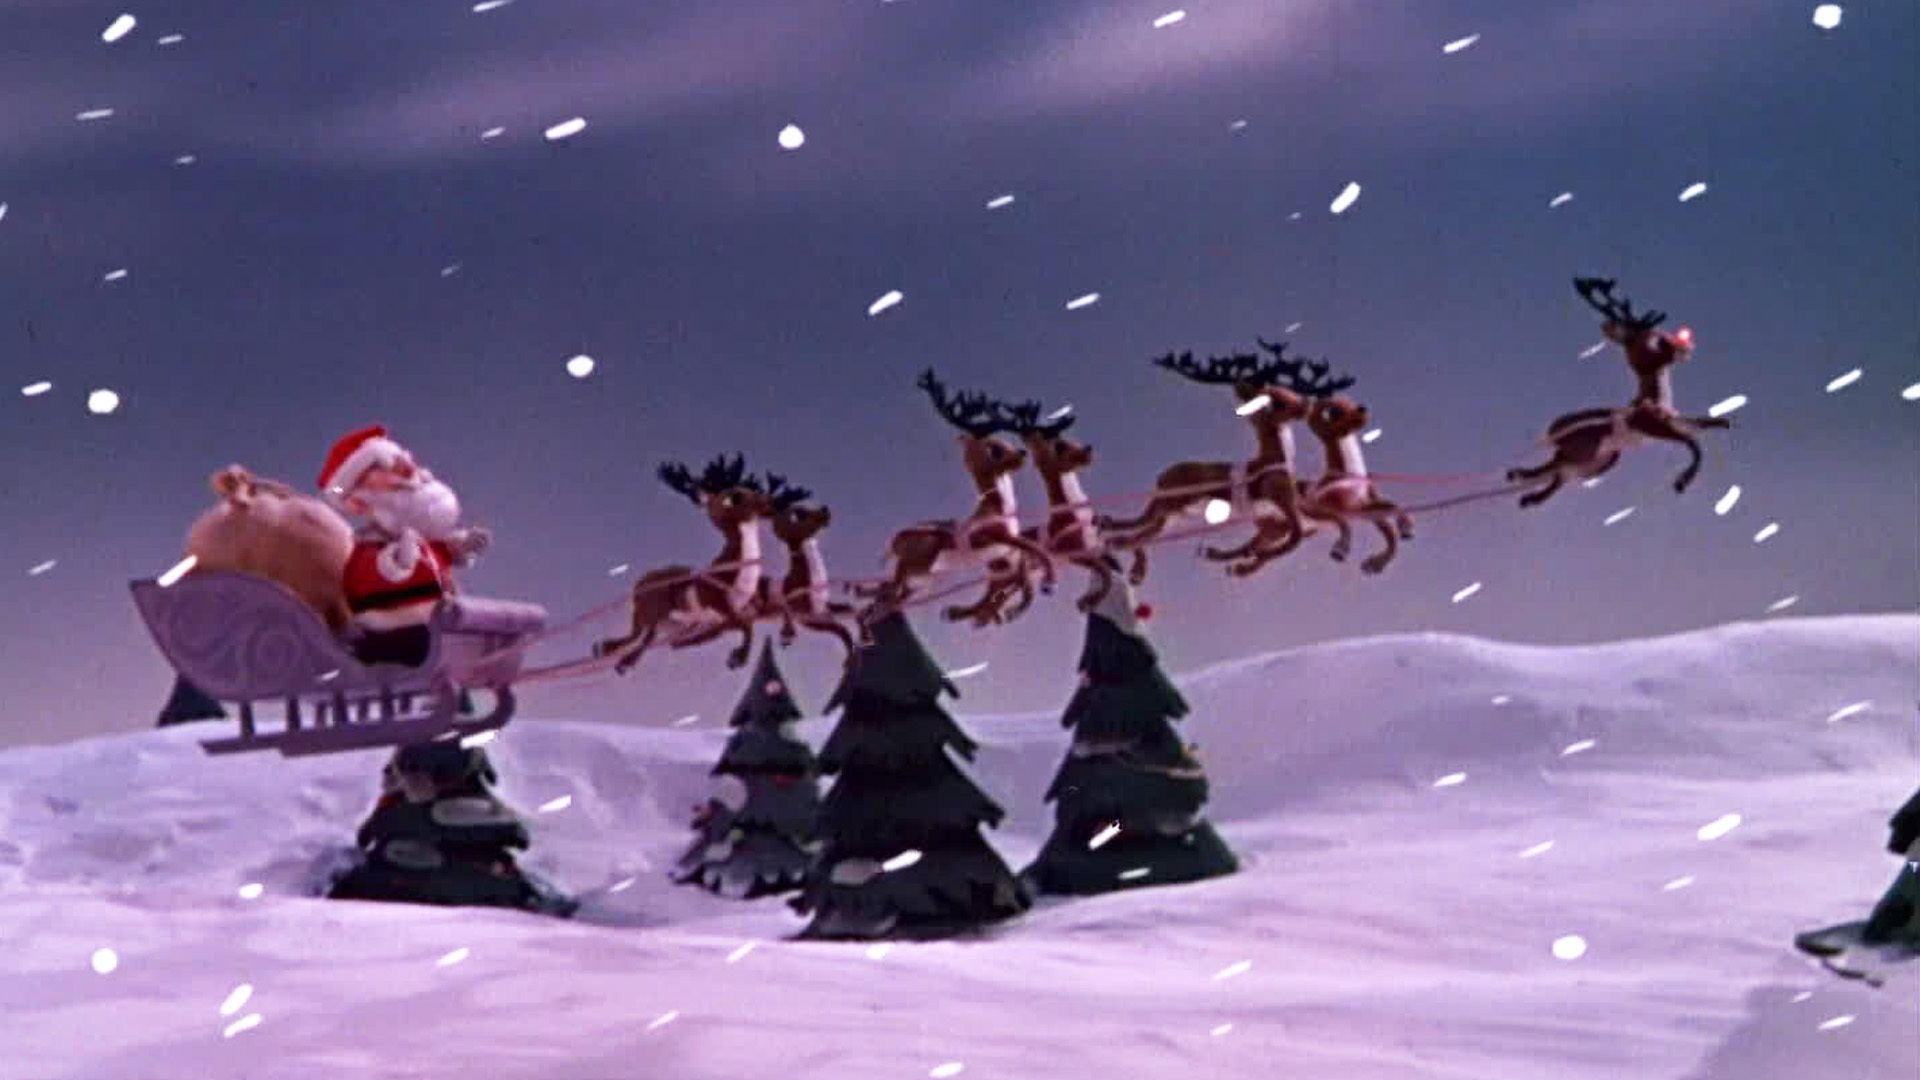 Rudolph The Red Nosed Reindeer Wallpaper Car Pictures